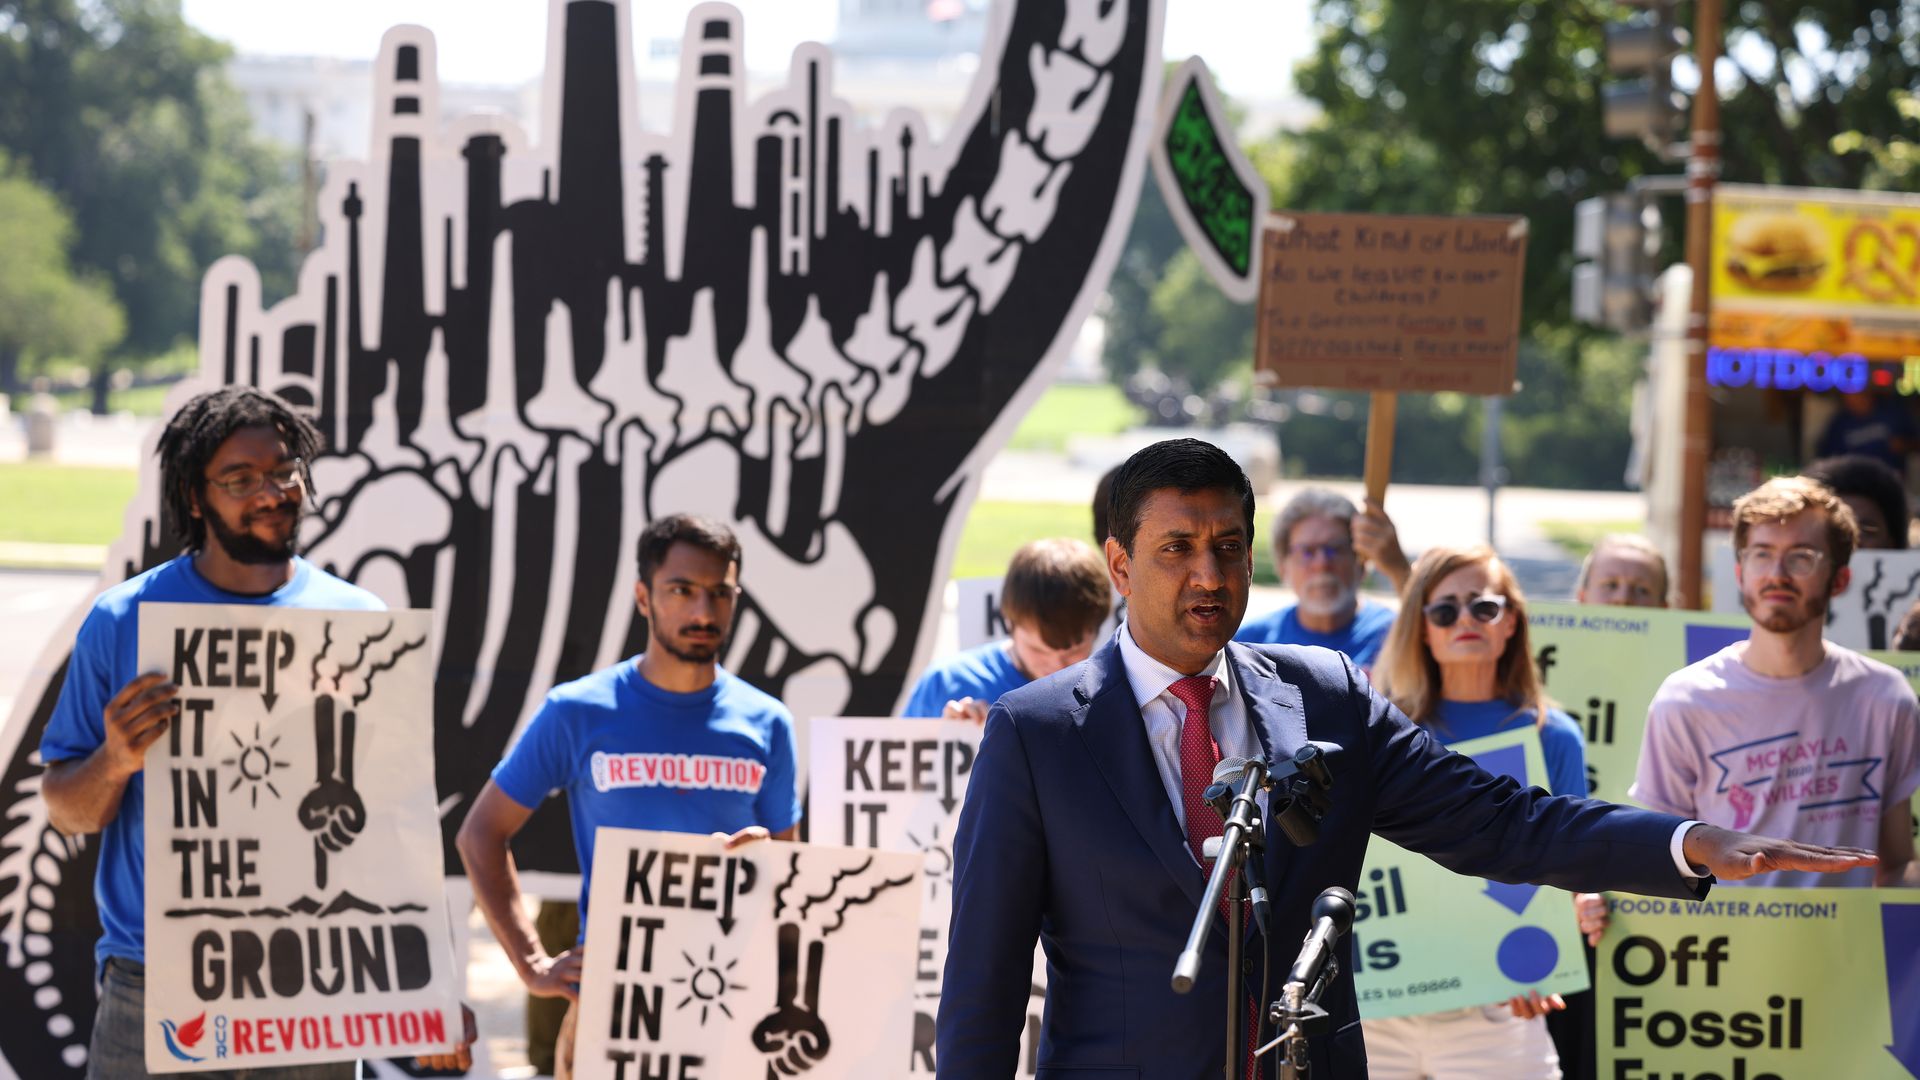 Rep. Ro Khanna (D-CA) speaks at an “End Fossil Fuel” rally near the U.S. Capitol on June 29, 2021